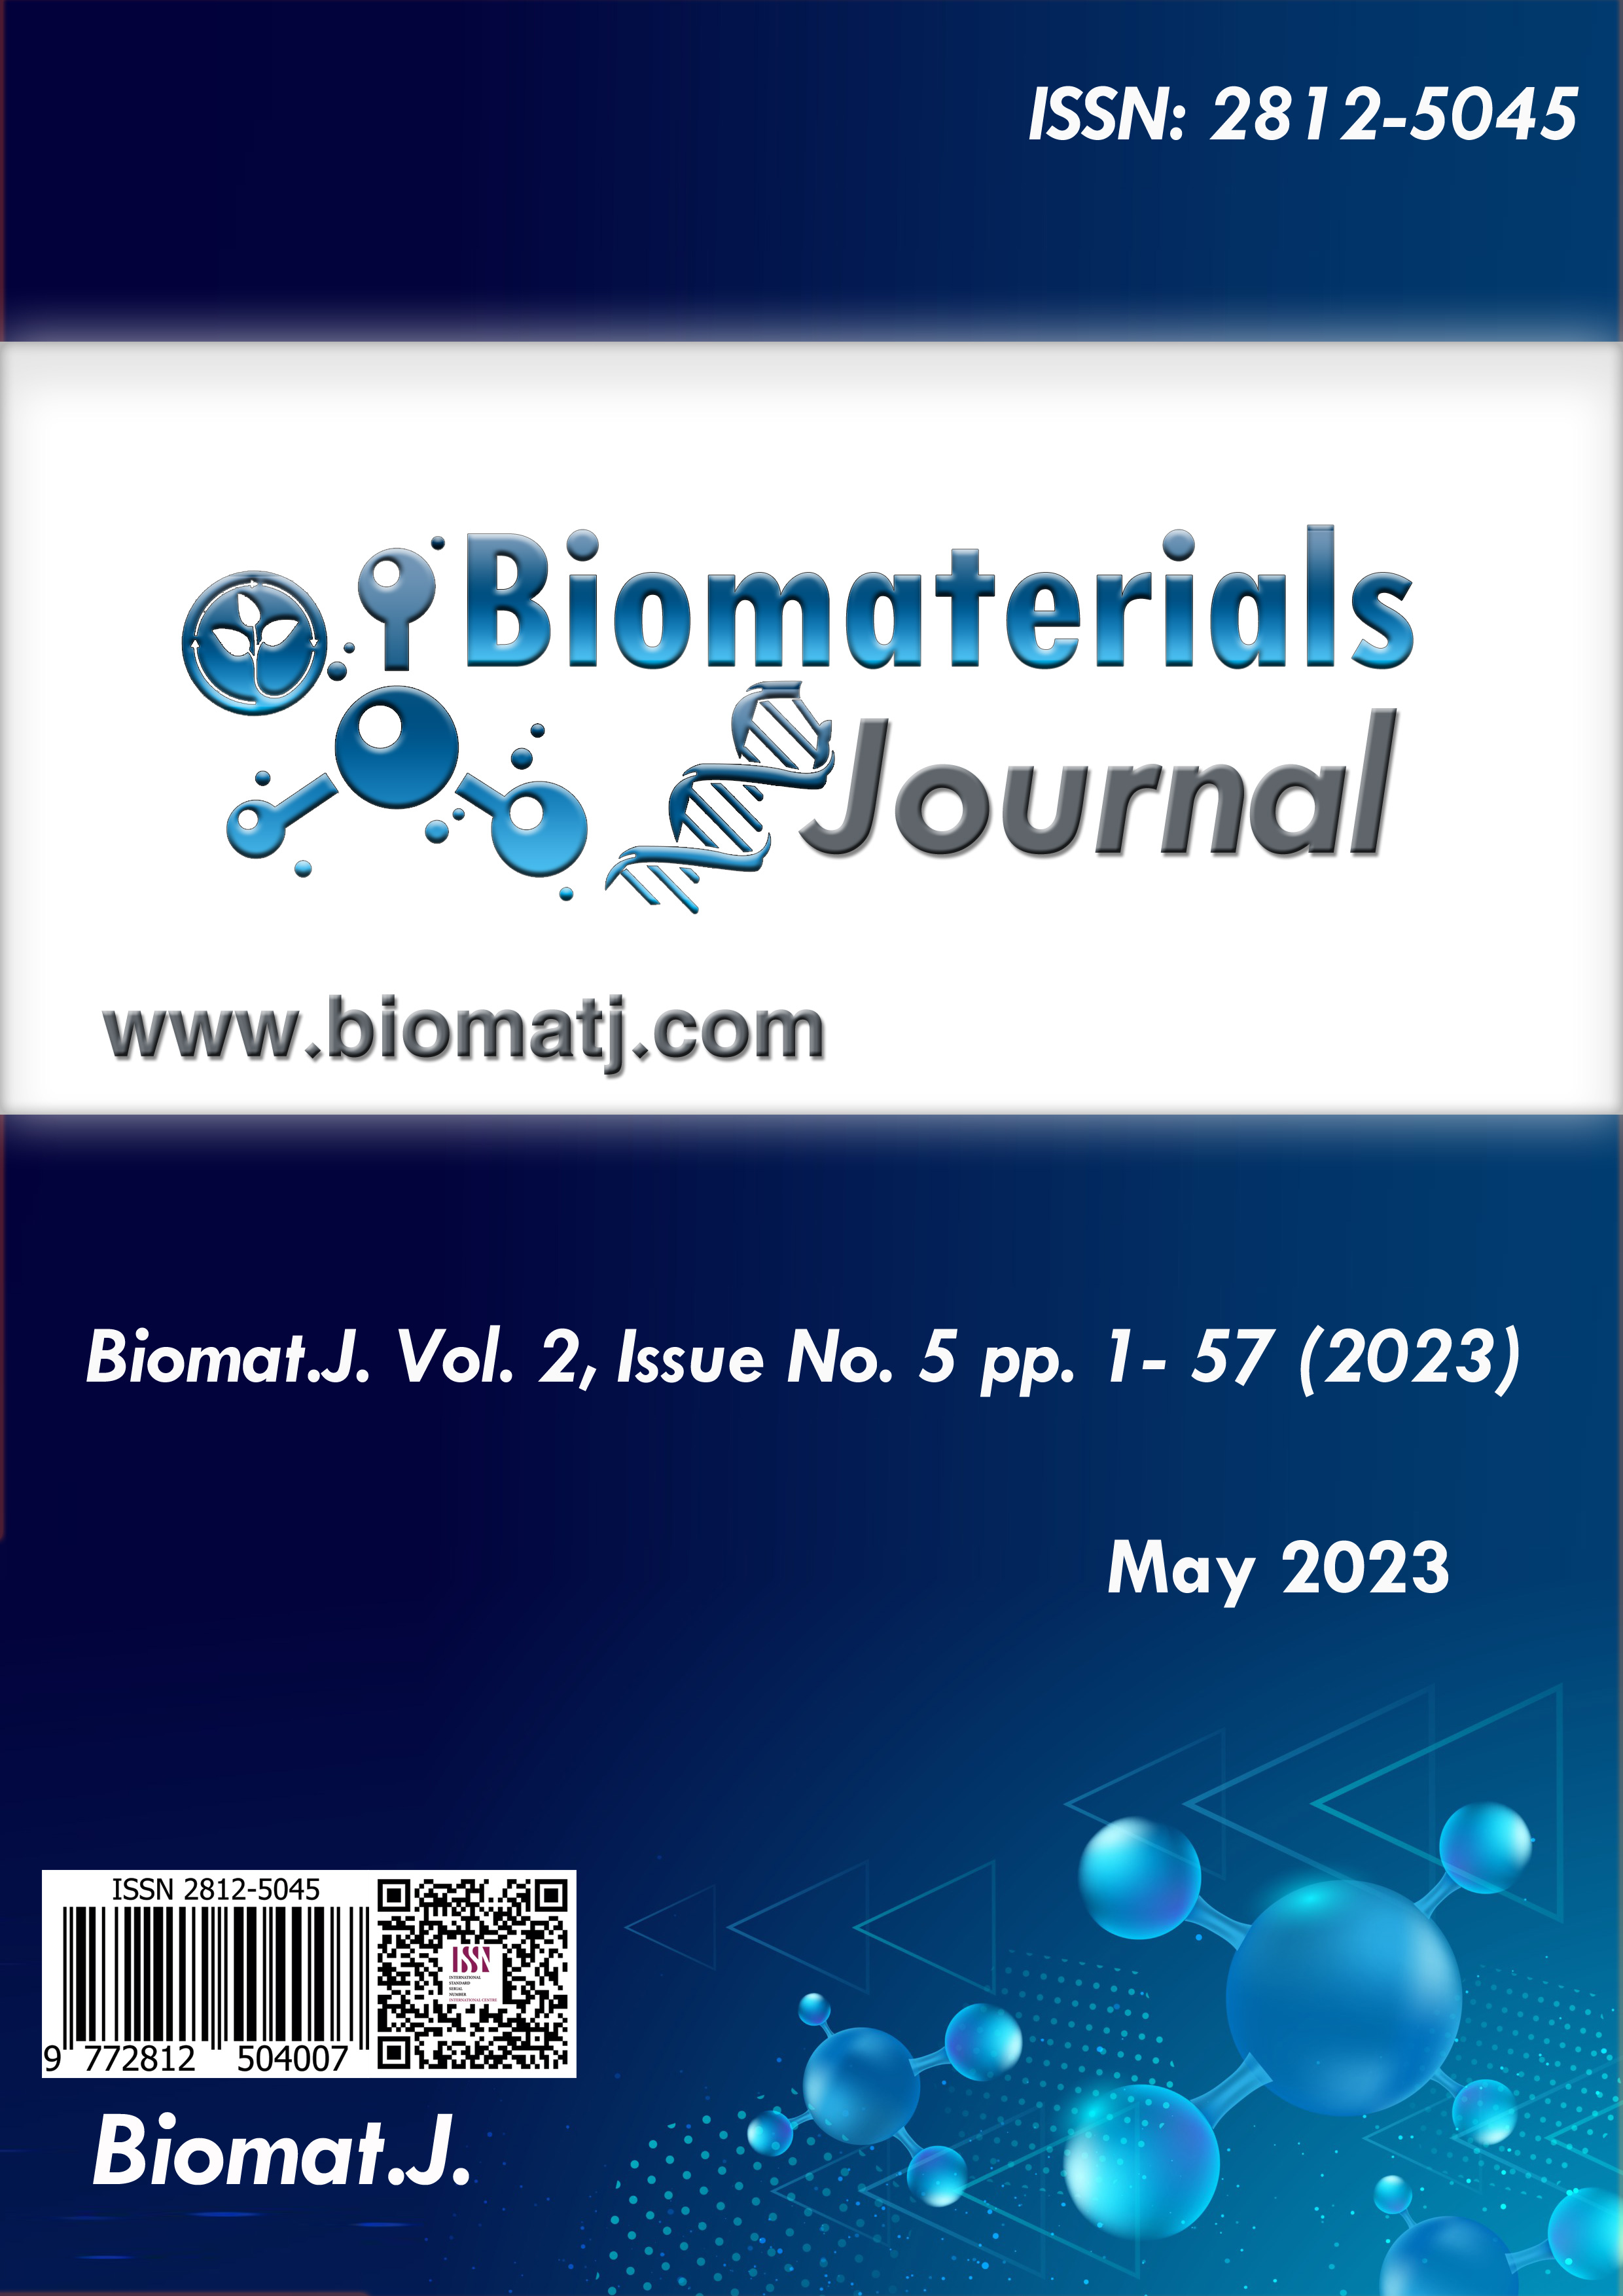 Biomaterials Journal Volume 2, Issue No. 5, May 2023